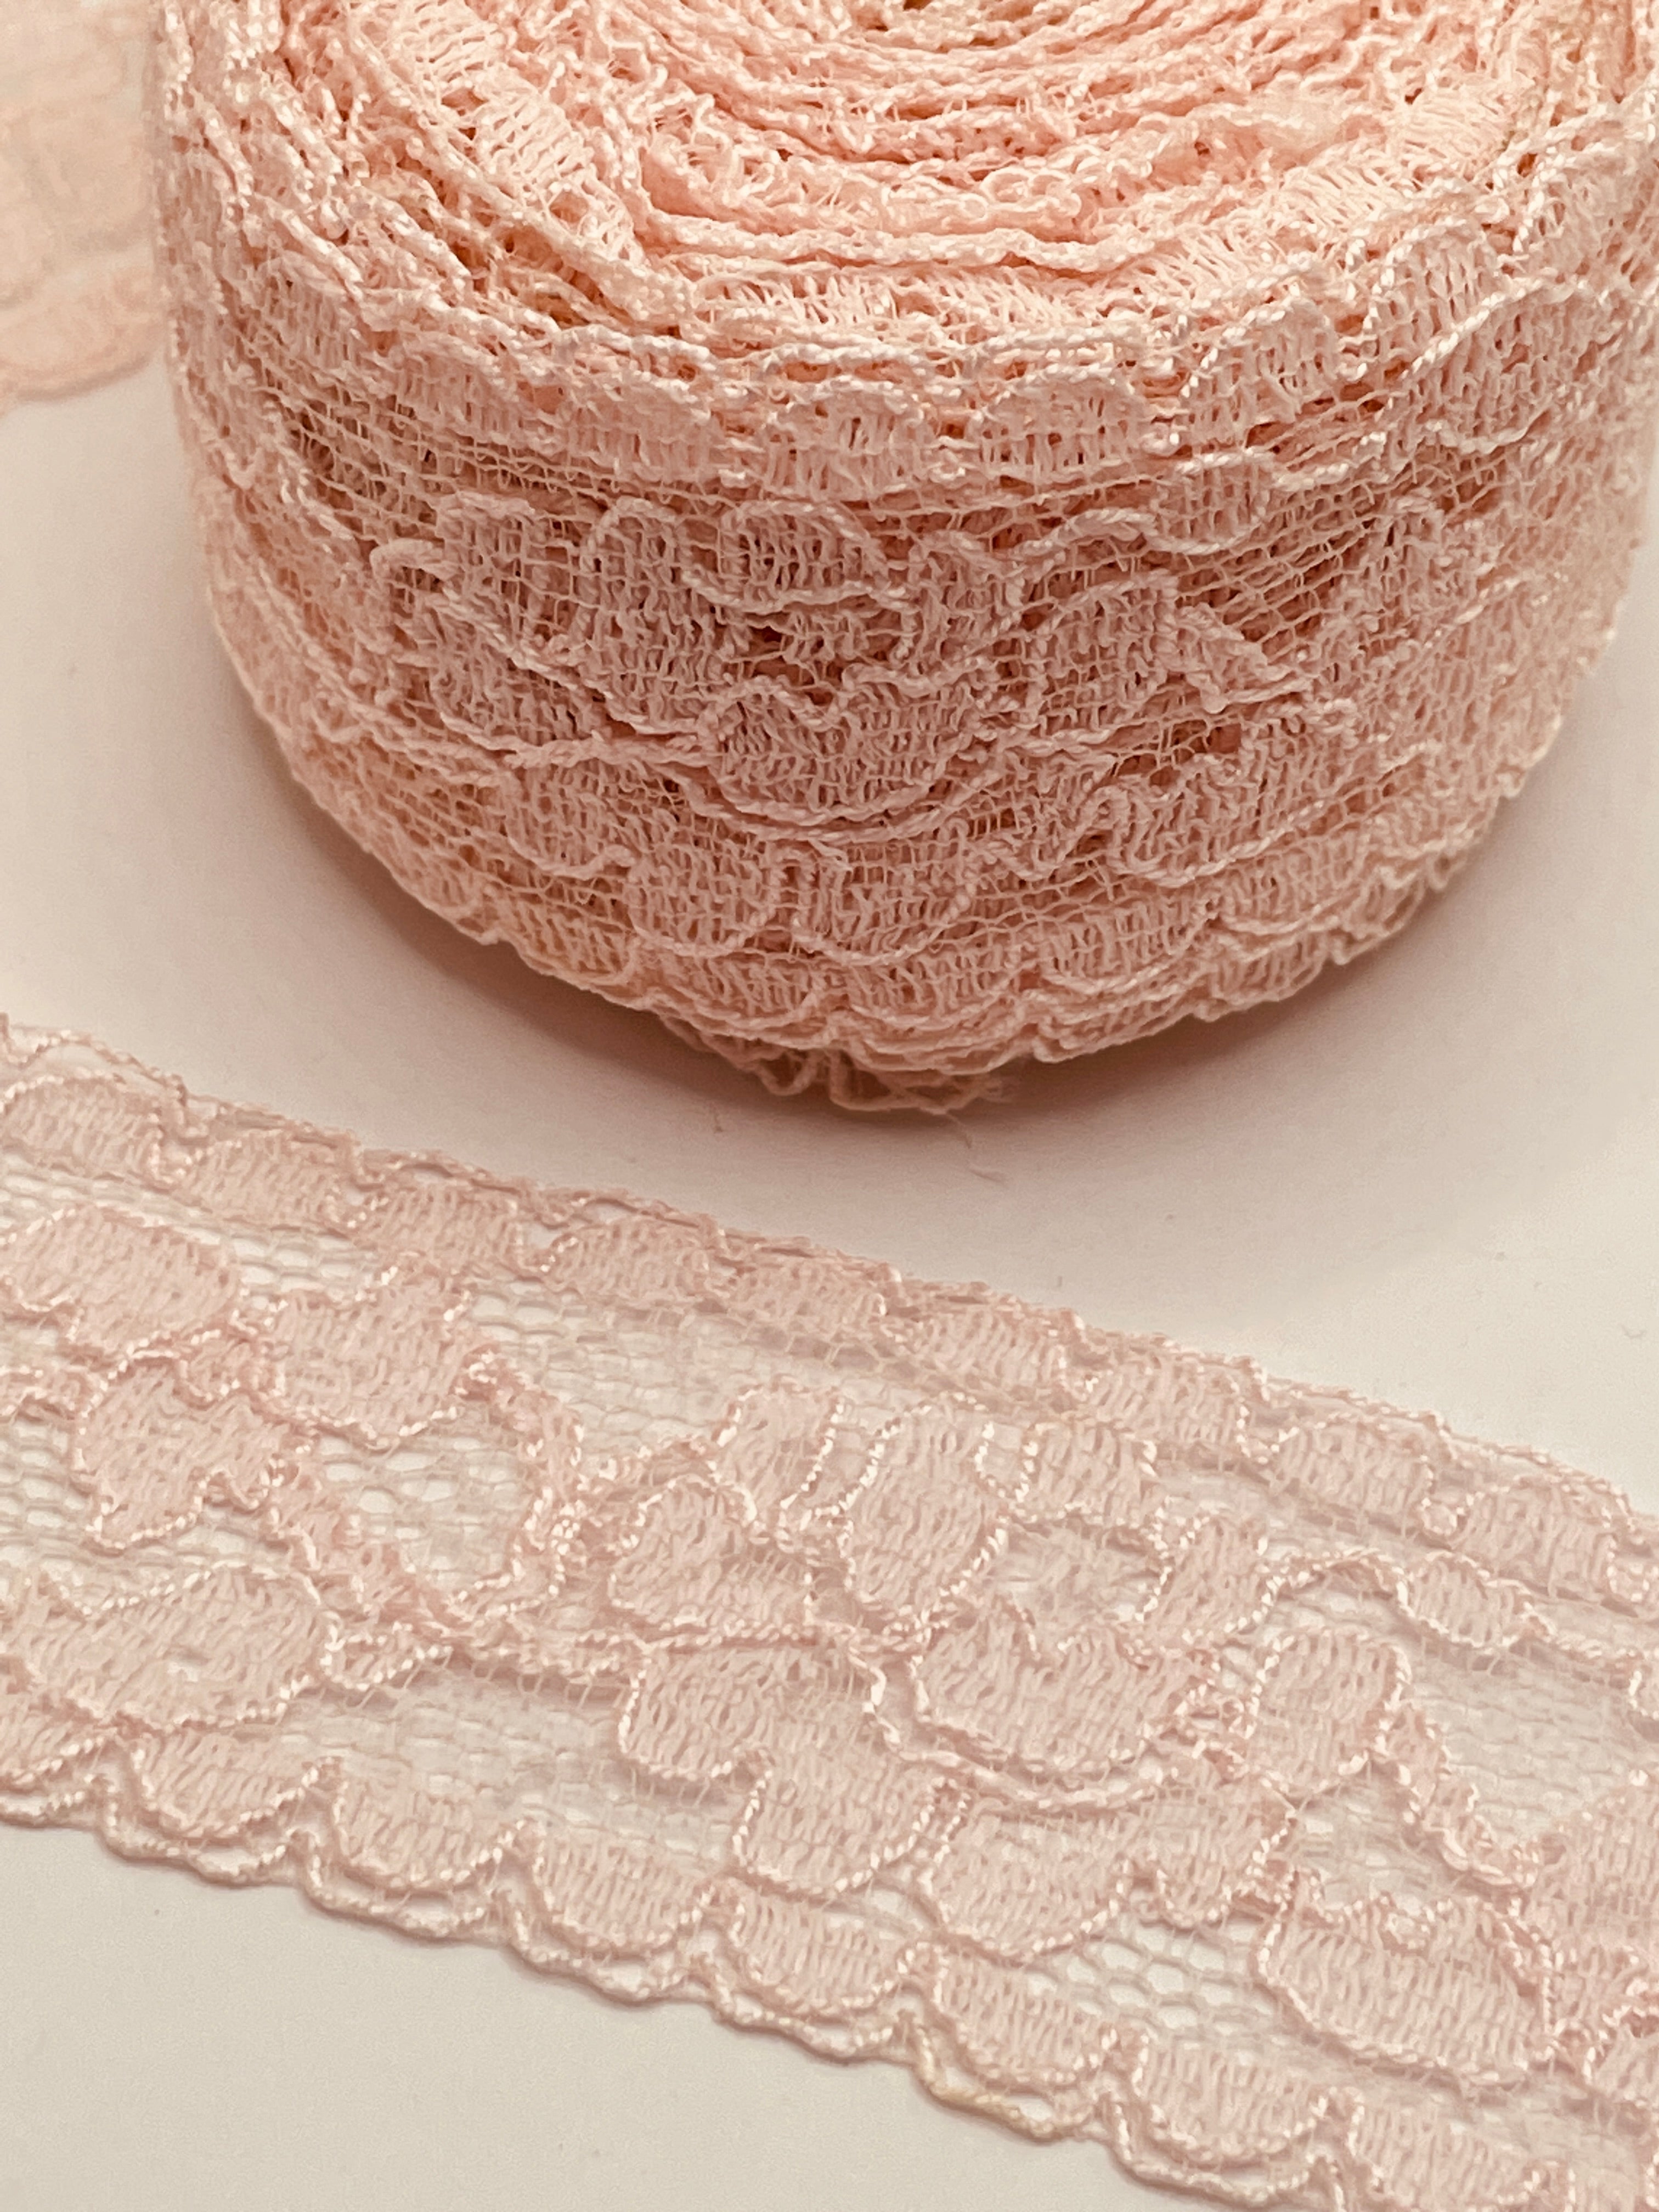 3 pieces of Vintage Crochet Lace Trim, Handmade Rayon and Cotton